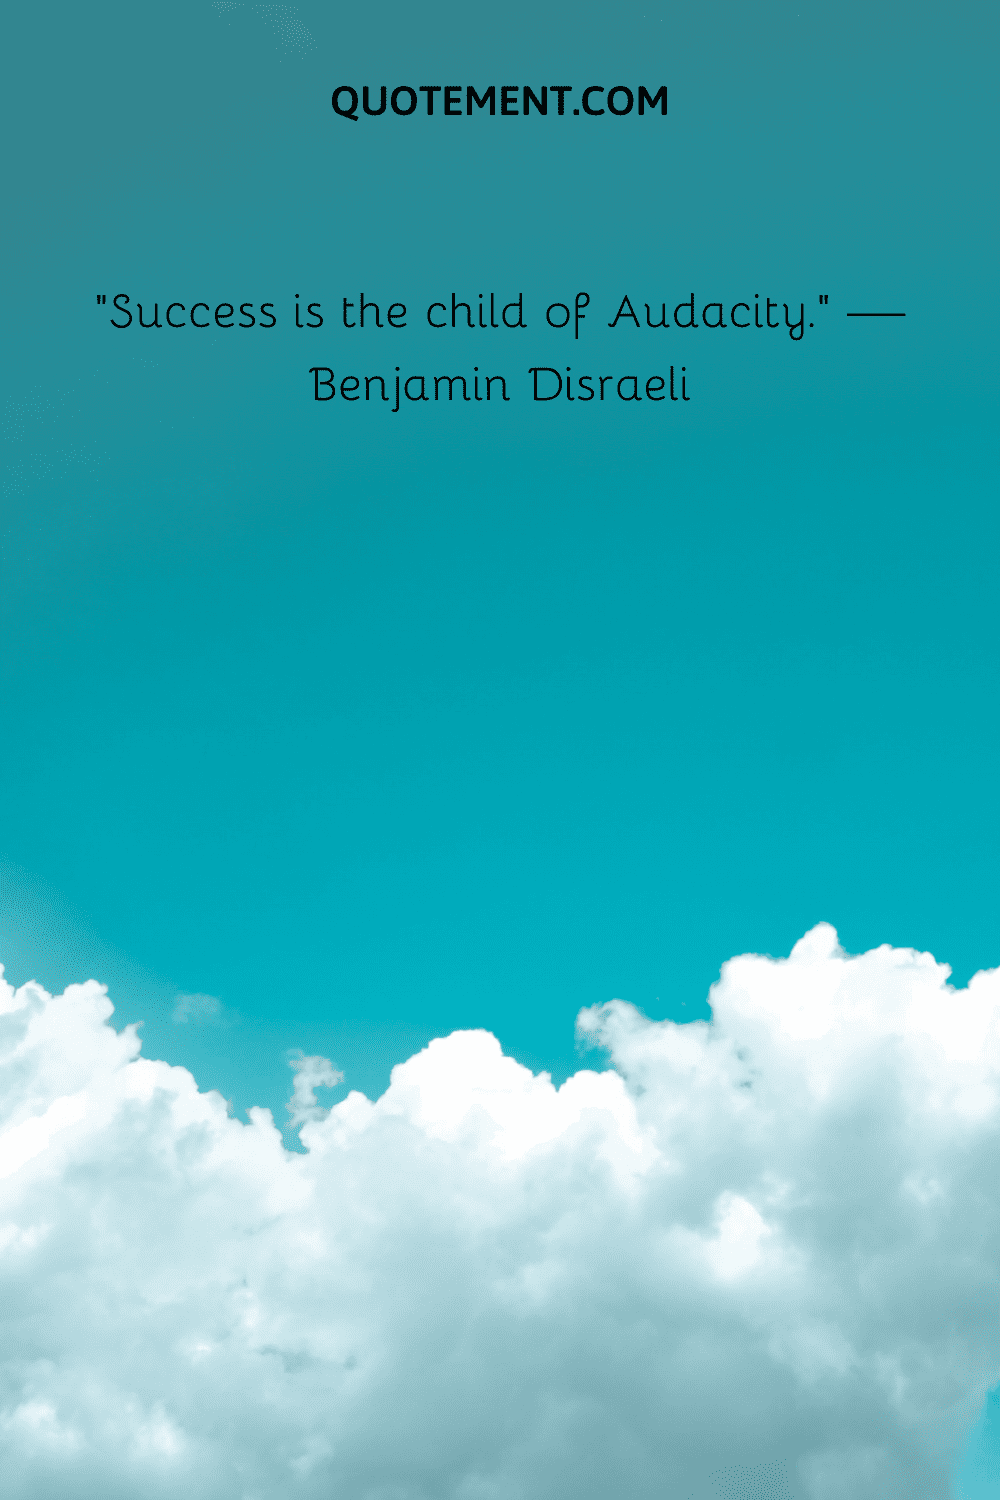 Success is the child of Audacity